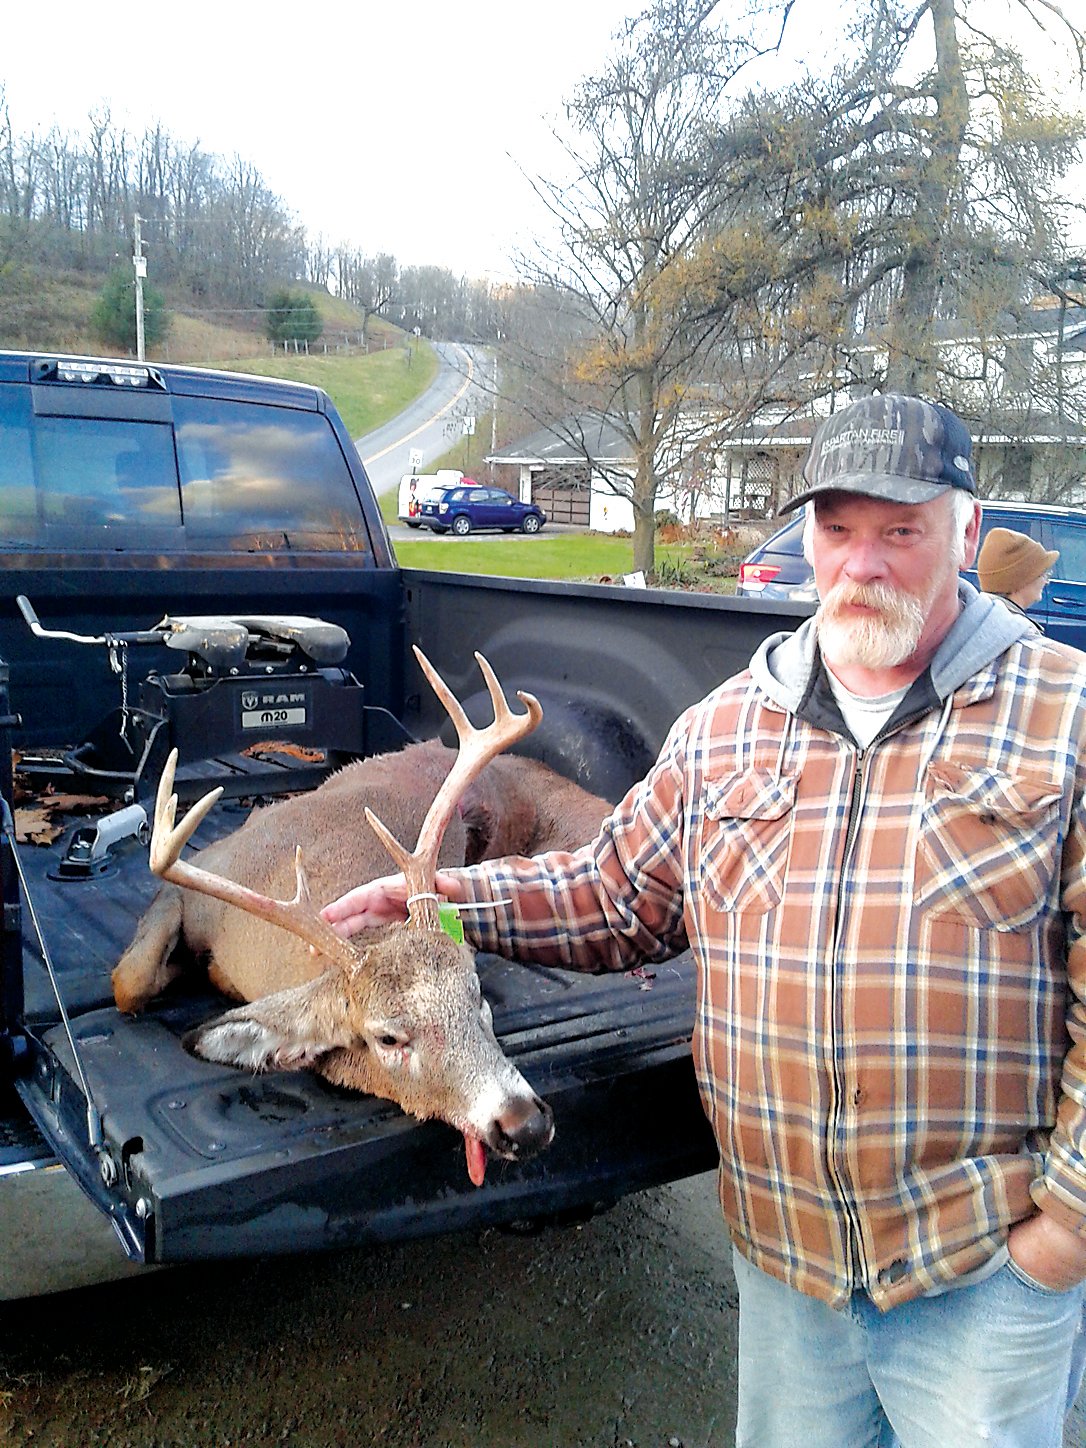 Forrest Gorton harvested a buck in the Town of Delaware on November 27. The 8-pointer weighed 141 pounds and scored a 66.75. The buck had 20.25 and 20-inch beams to go along with a 18.5-inch spread.